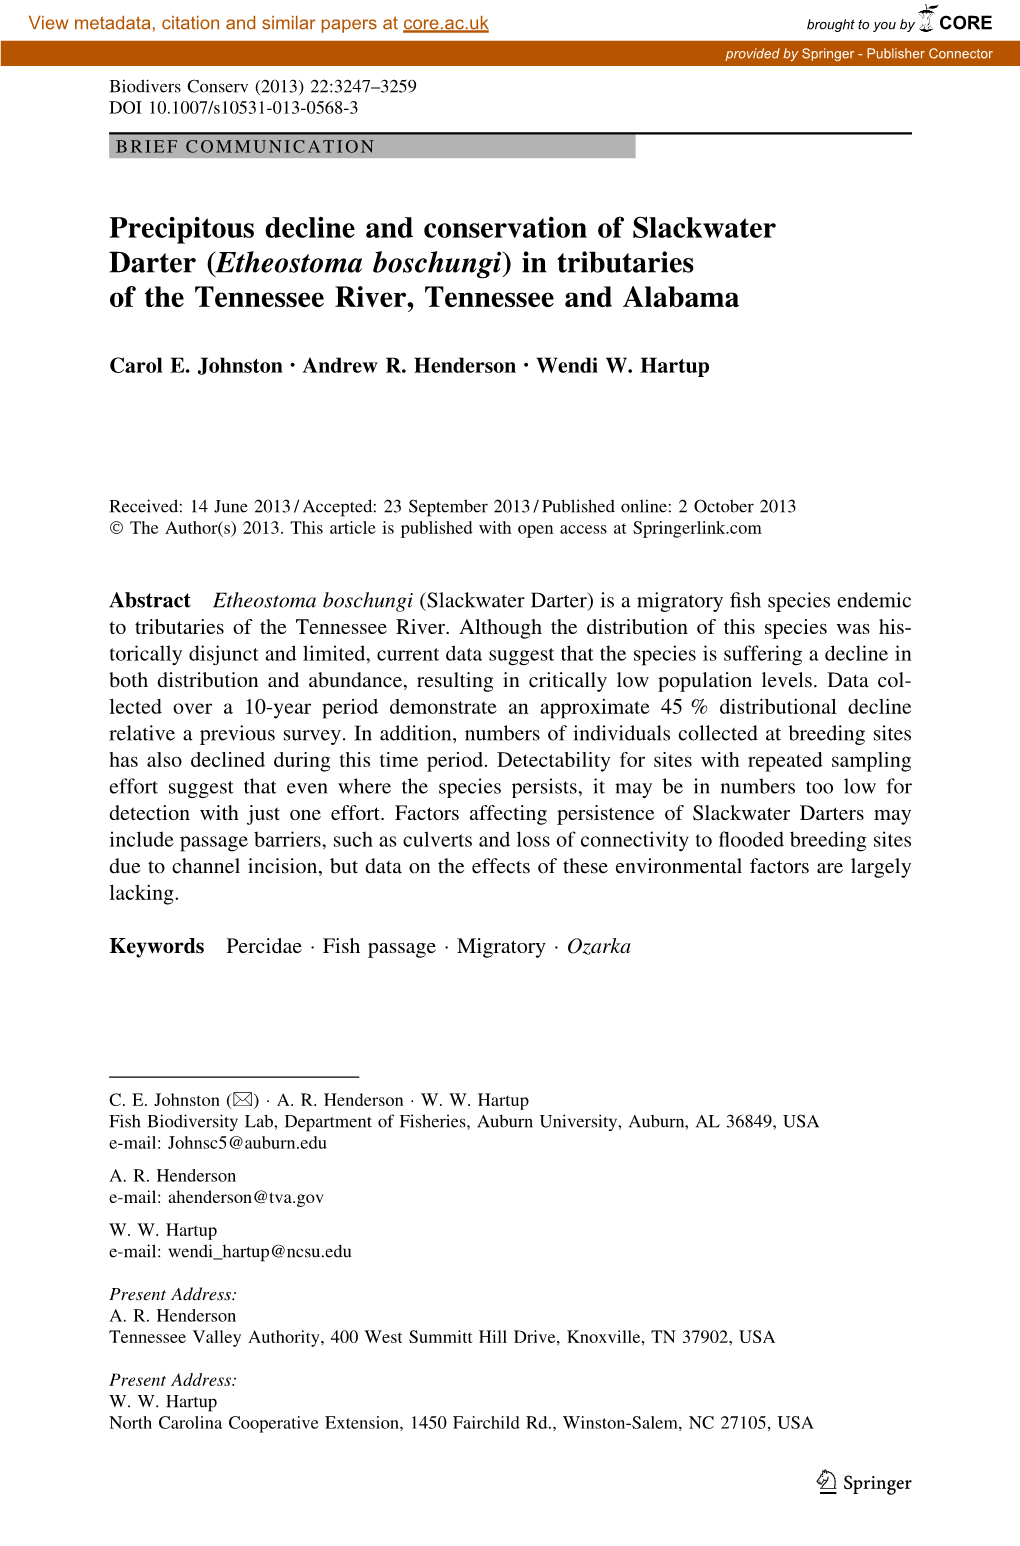 Precipitous Decline and Conservation of Slackwater Darter (Etheostoma Boschungi) in Tributaries of the Tennessee River, Tennessee and Alabama